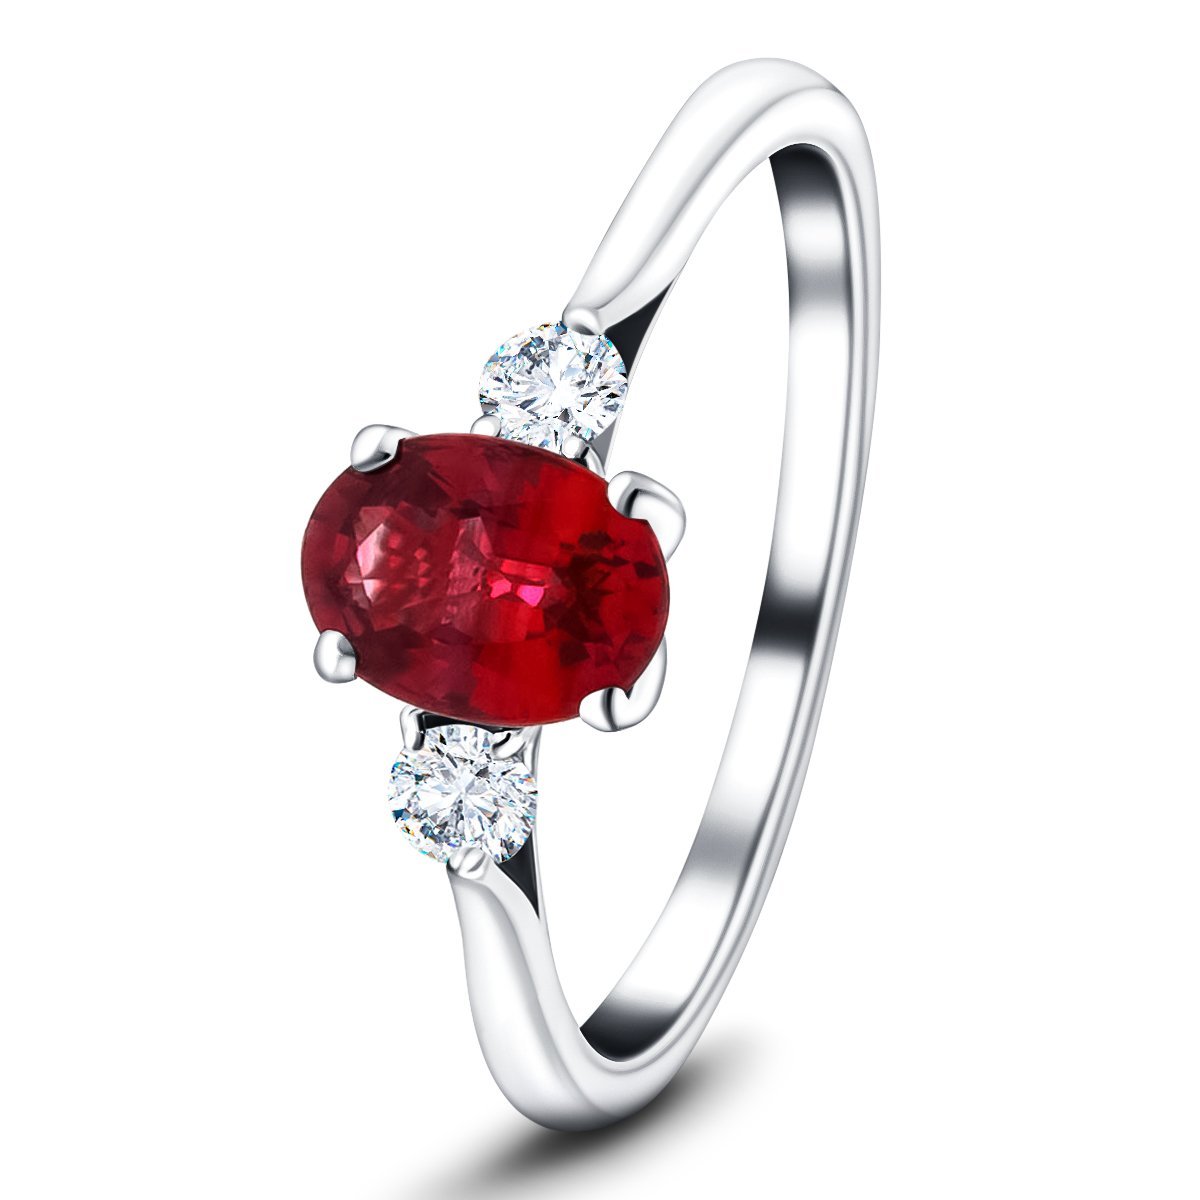 1.60ct Ruby with 0.25ct Diamond Trilogy Ring in 18k White Gold - All Diamond